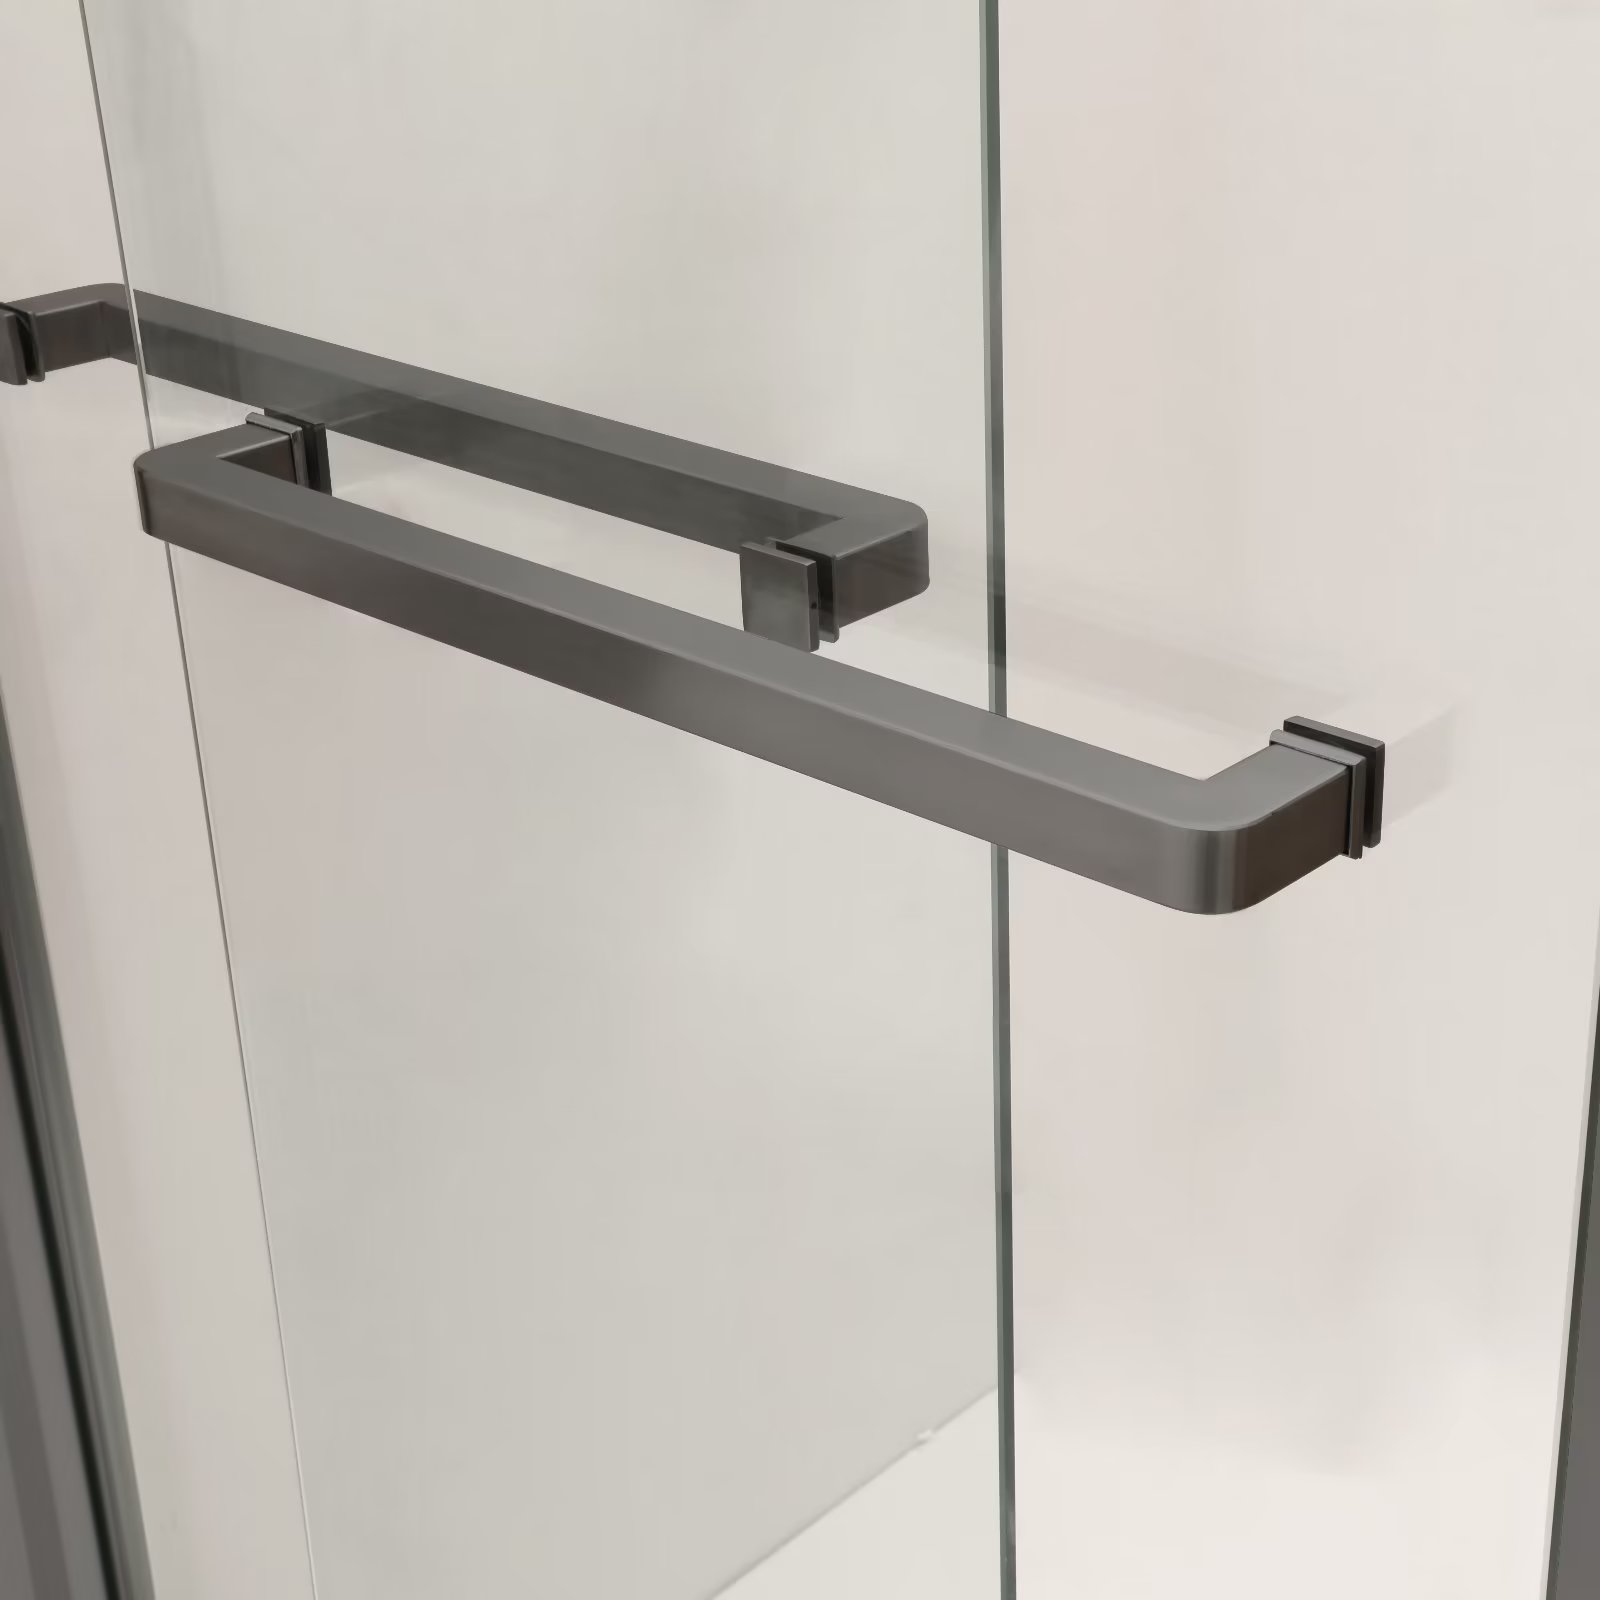 ELEGANT Sliding Shower Door 48 in. W x 76 in. H Sliding Shower Enclosure  with 3/8 in. Clear Tempered…See more ELEGANT Sliding Shower Door 48 in. W x